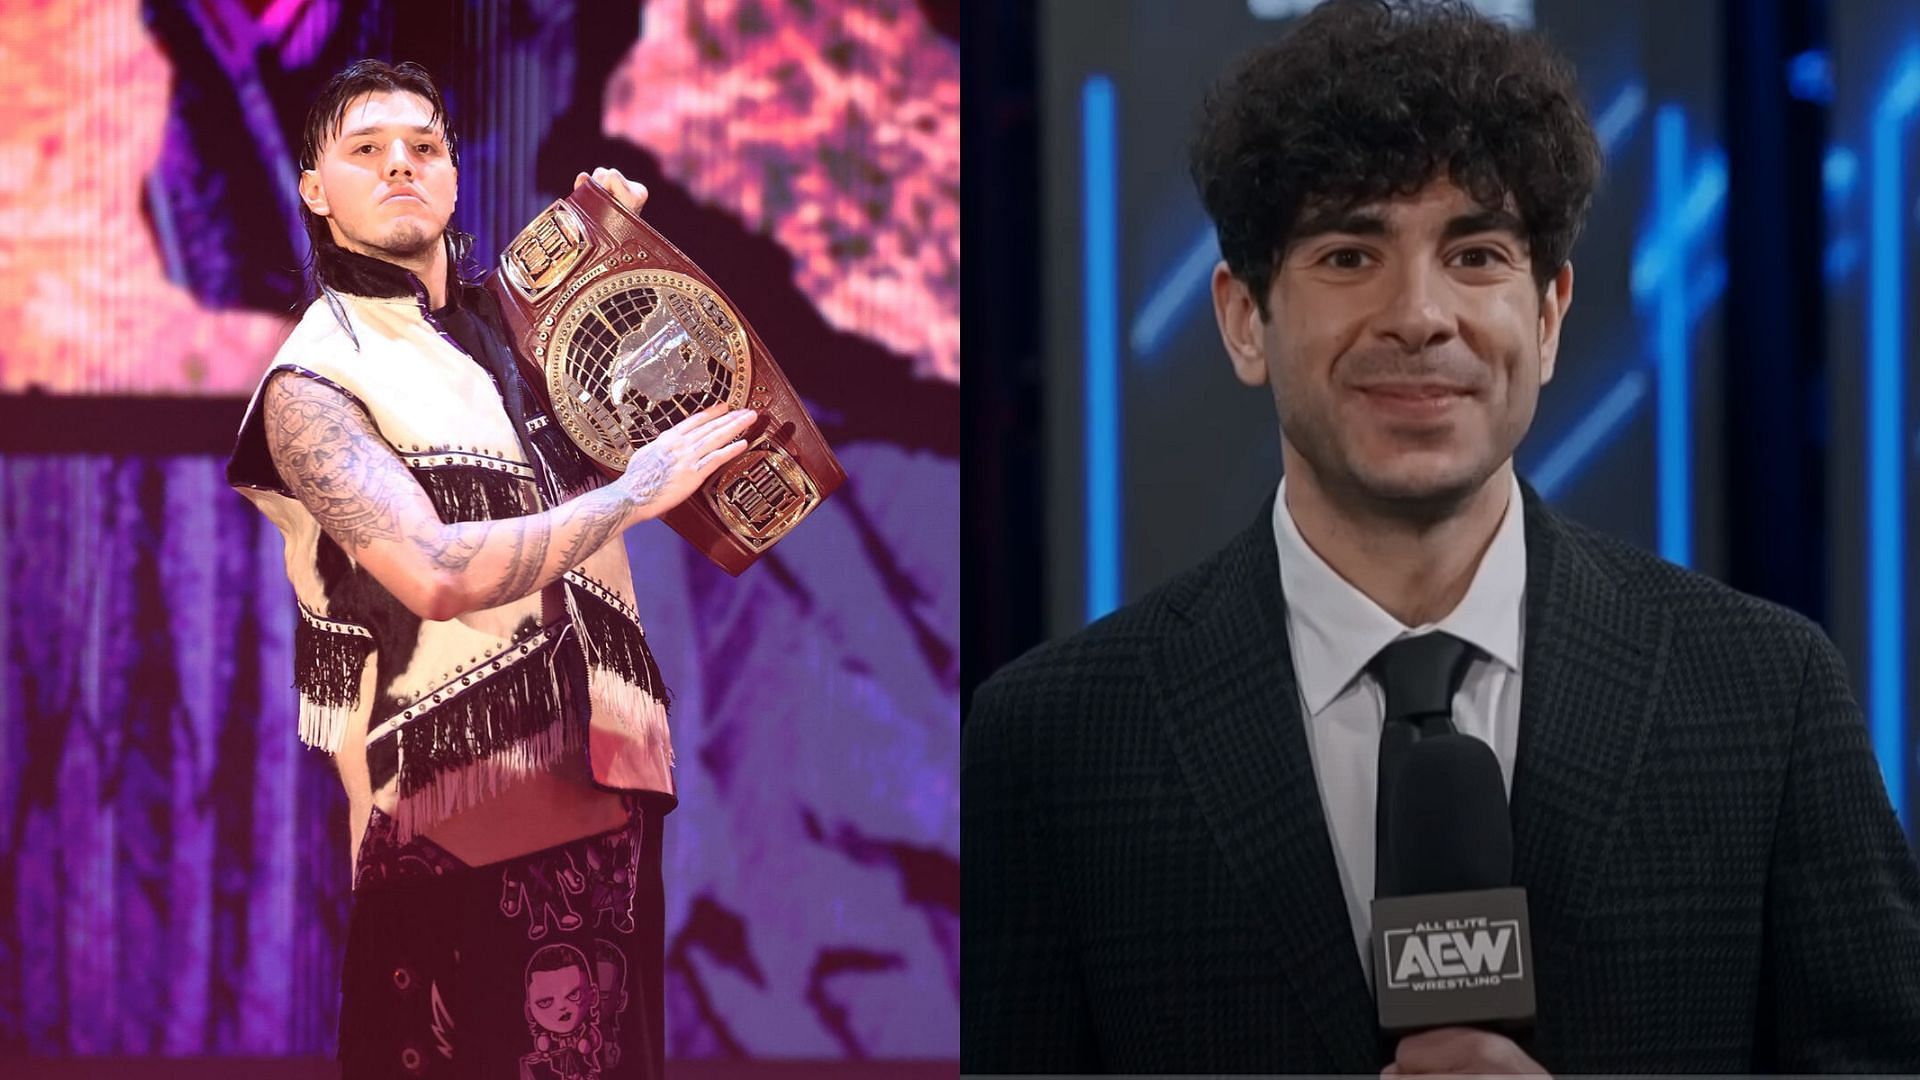 Dominik Mysterio of the Judgment Day and AEW President Tony Khan [photo courtesy of WWE